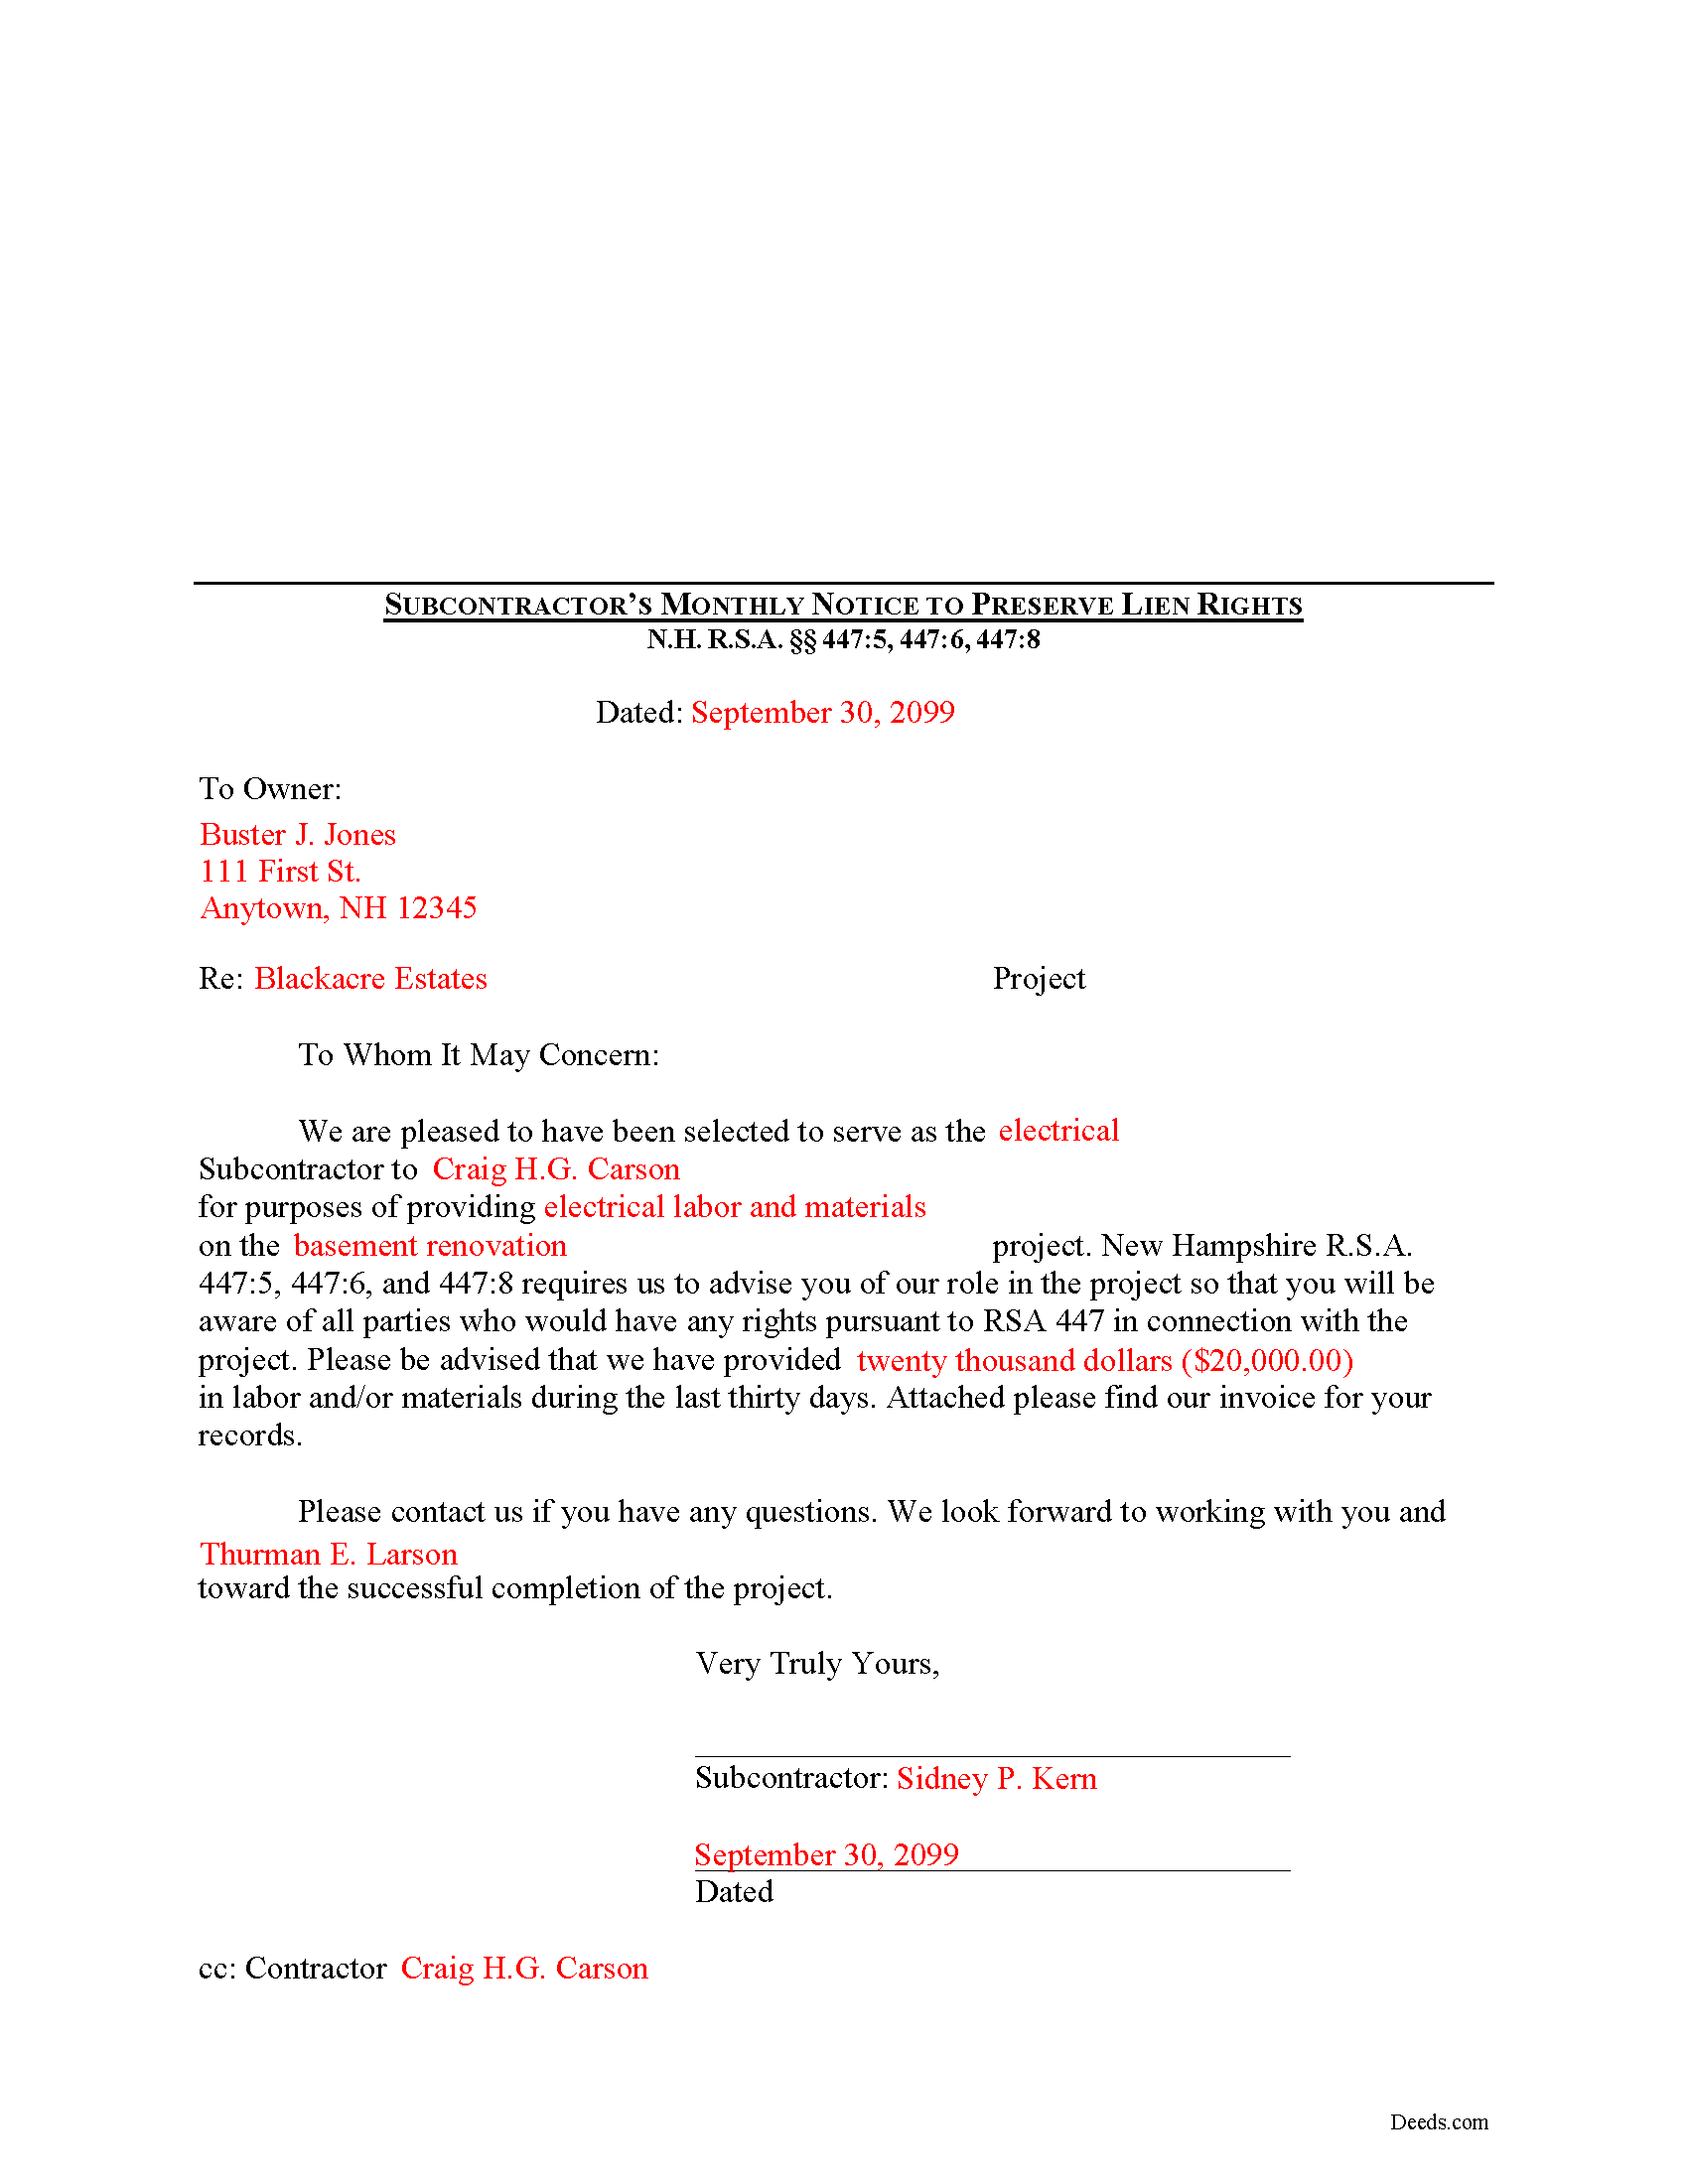 Completed Example of the Subcontractor Monthly Notice Document